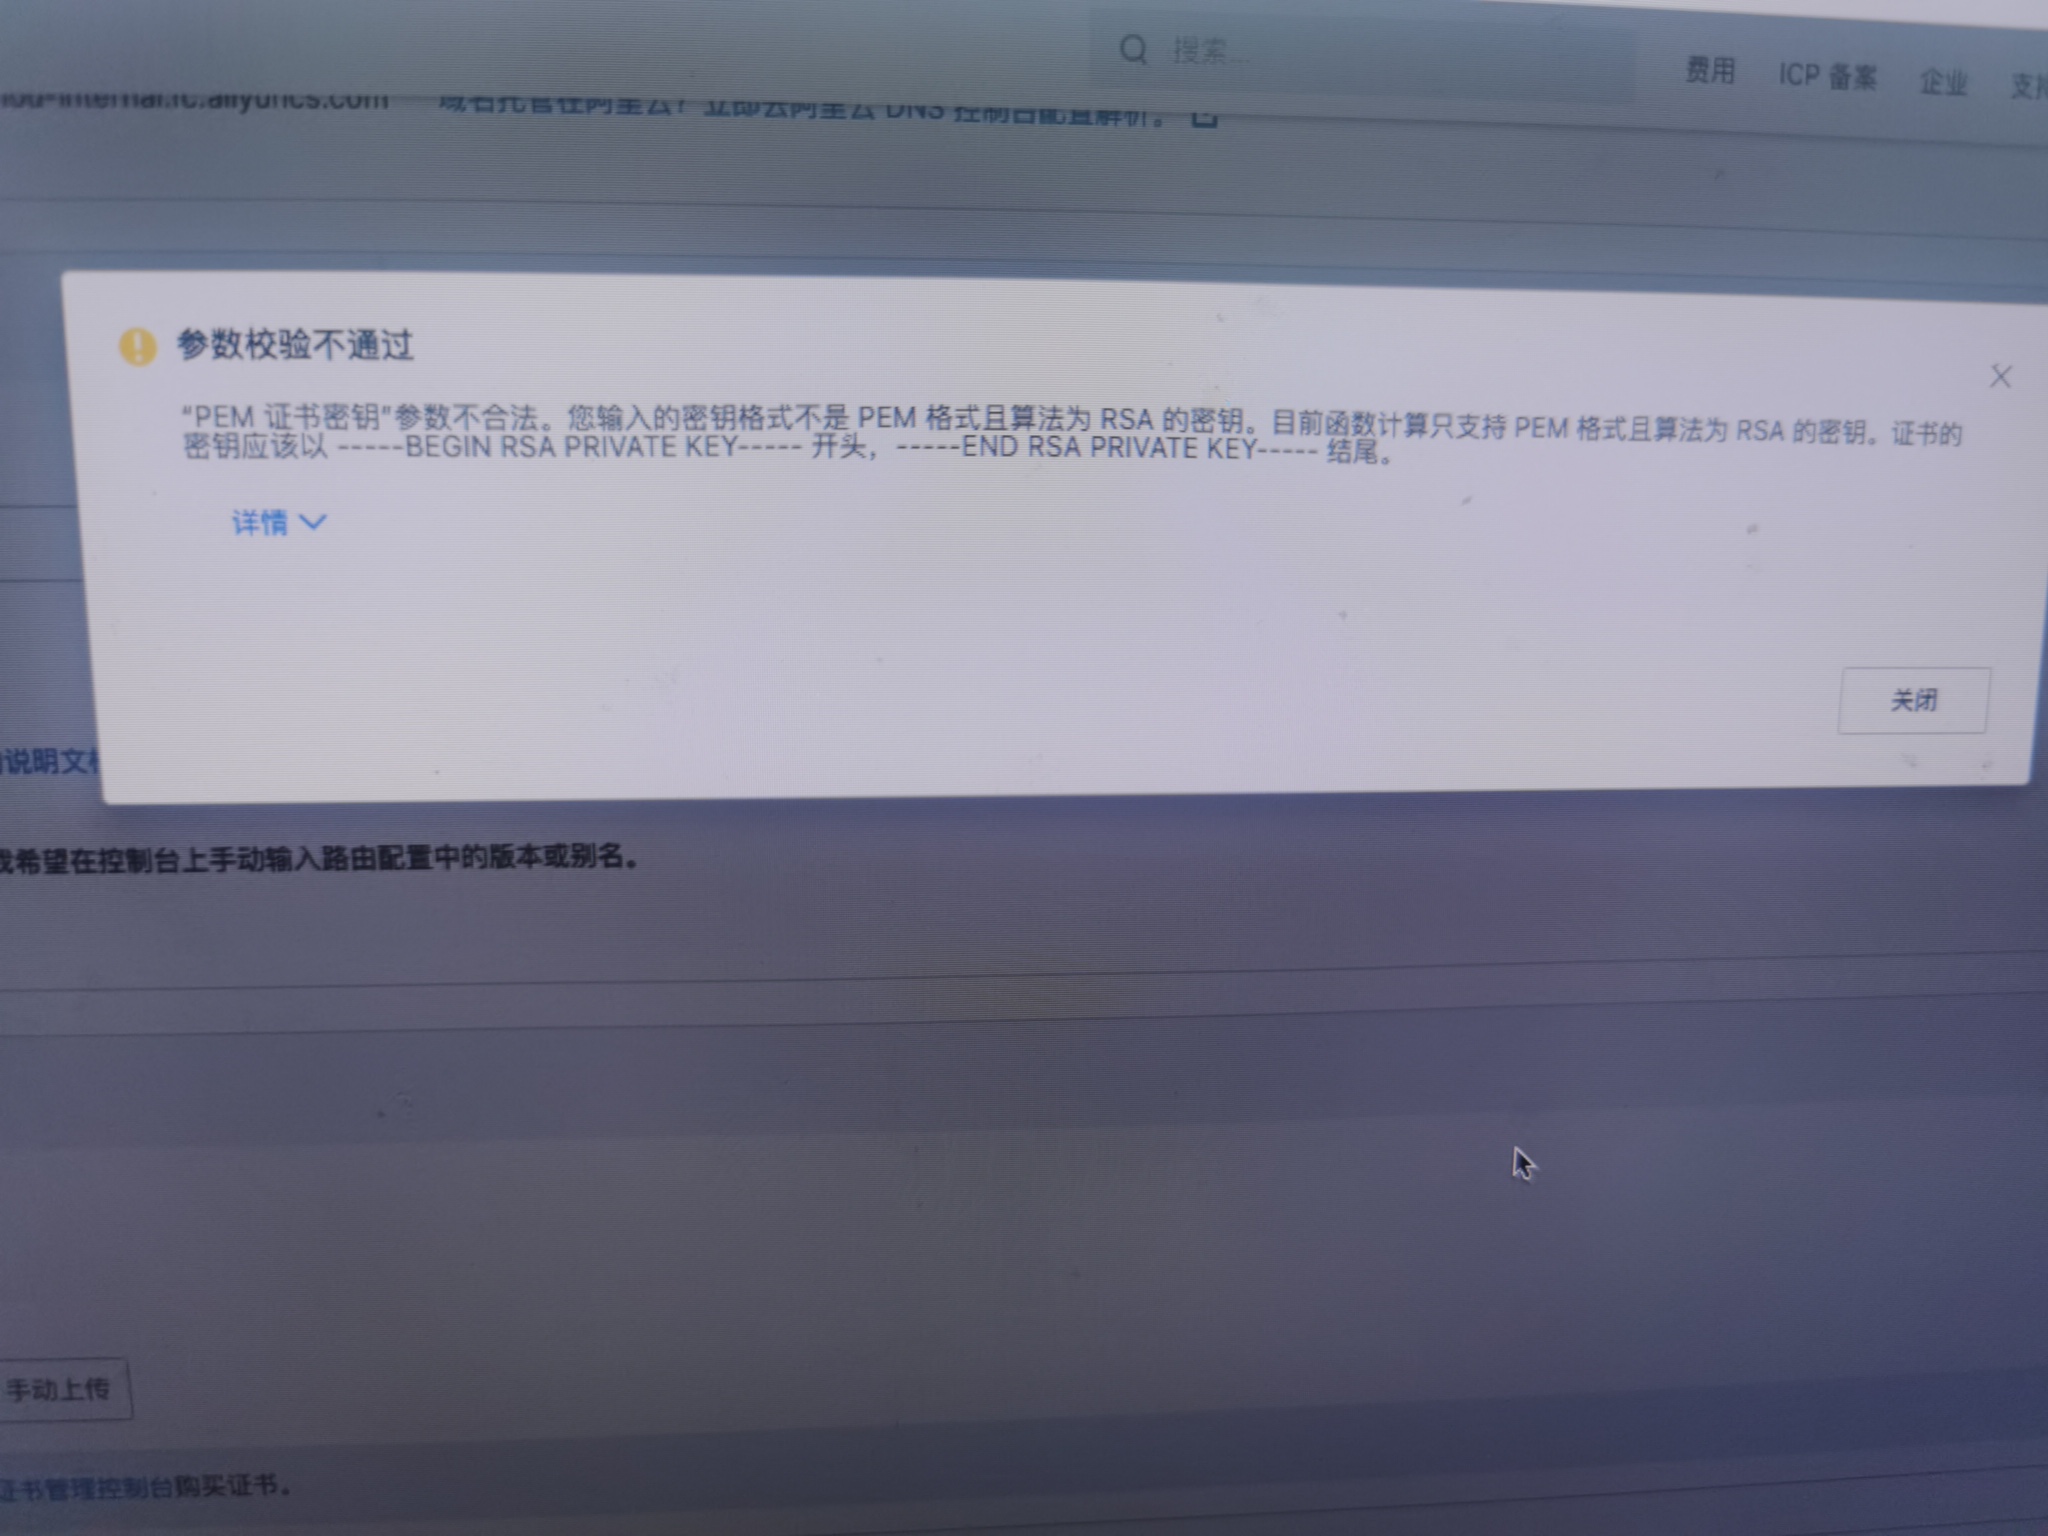 Serverless 应用引擎操作报错合集之阿里函数计算中，总是报错“Process exited unexpectedly before completing request (duration: 0ms, maxMemoryUsage: 0.00MB)”如何解决